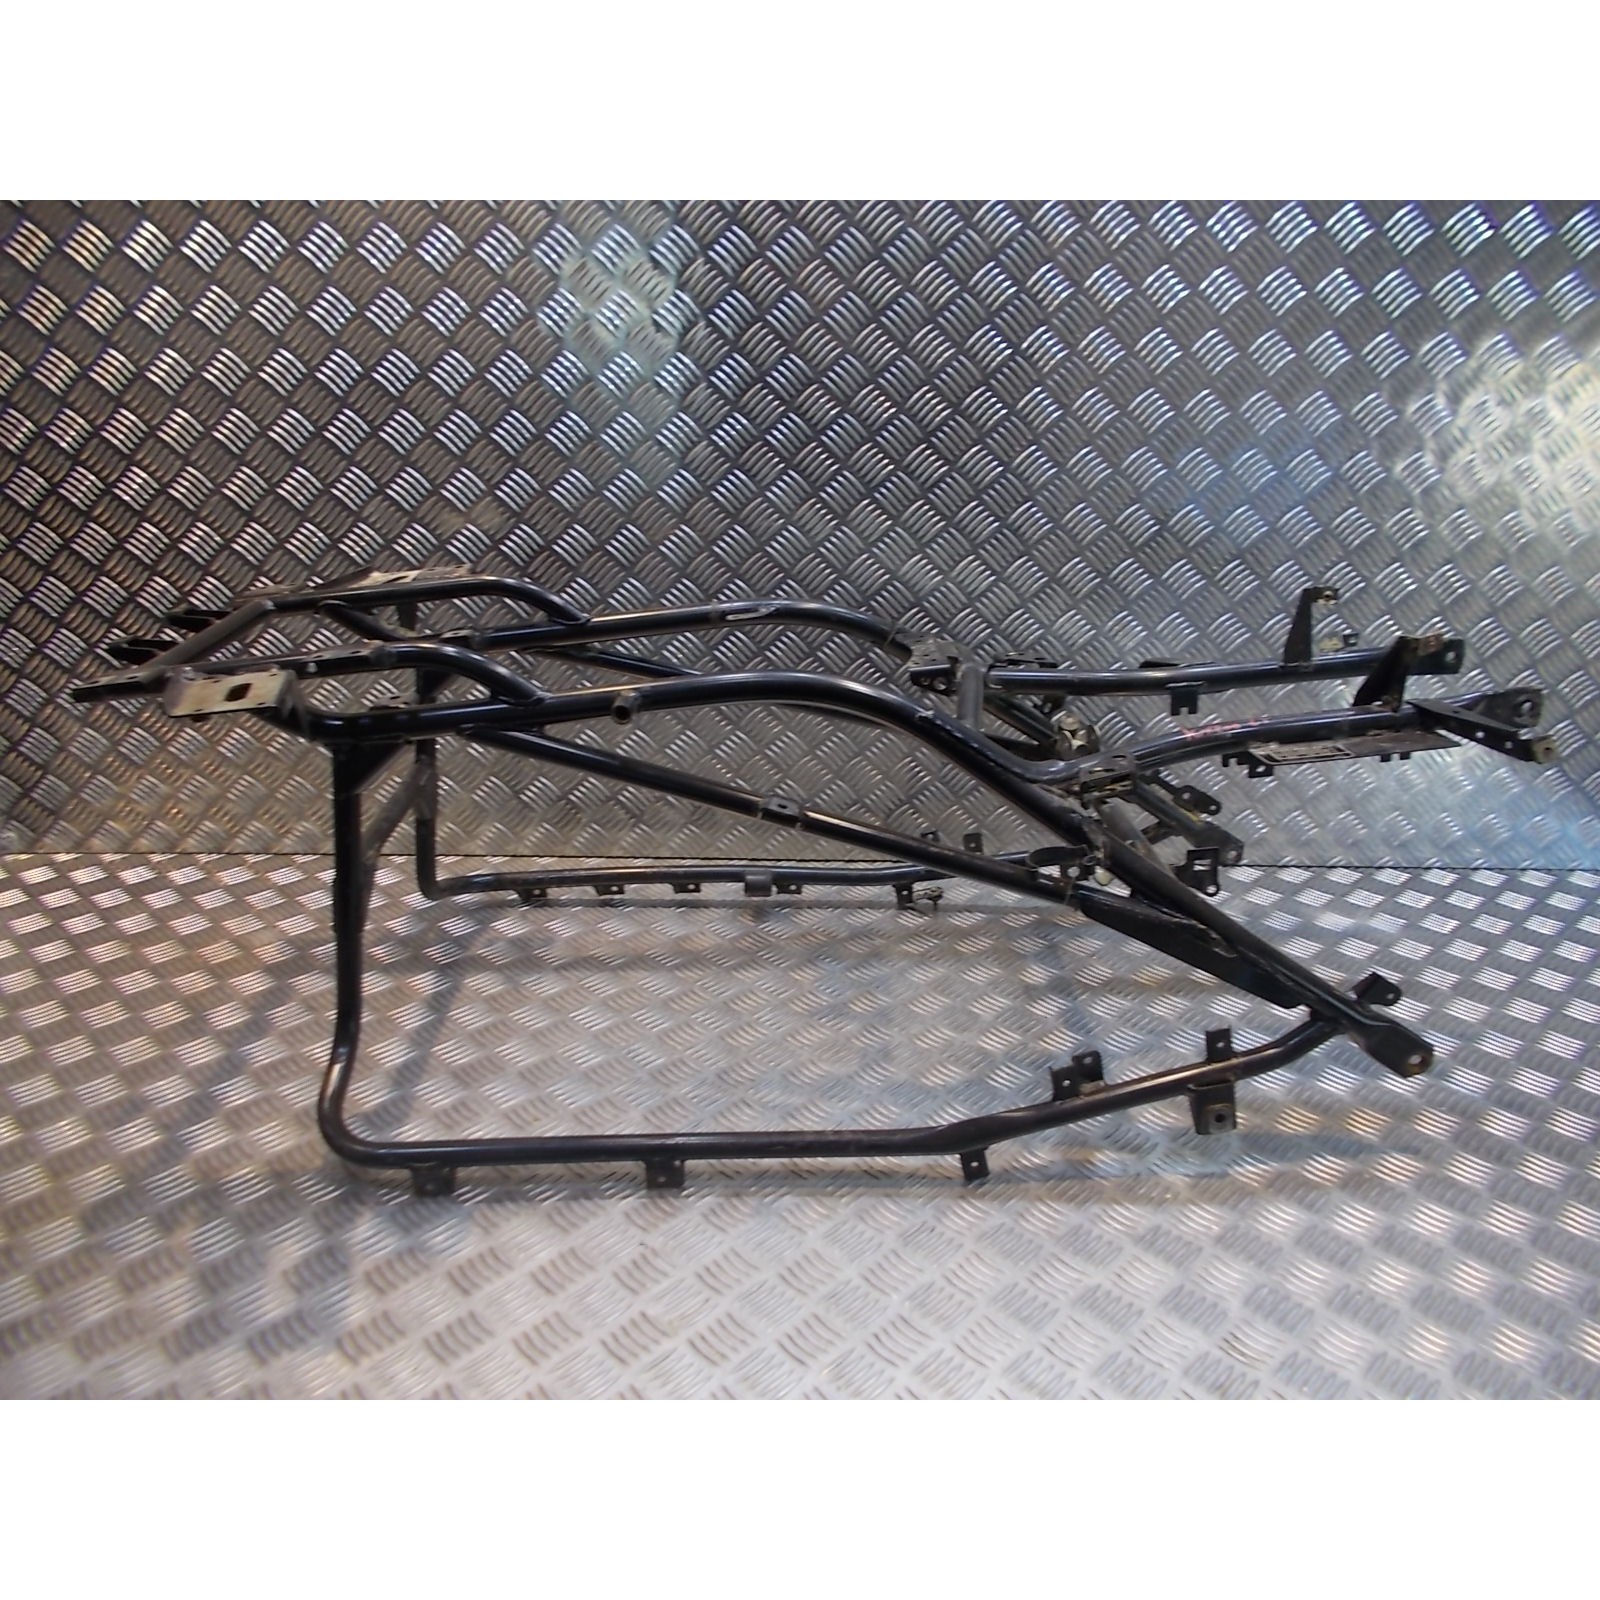 boucle cadre chassis arriere moto bmw k 1200 lt wb10545a 1999 -03